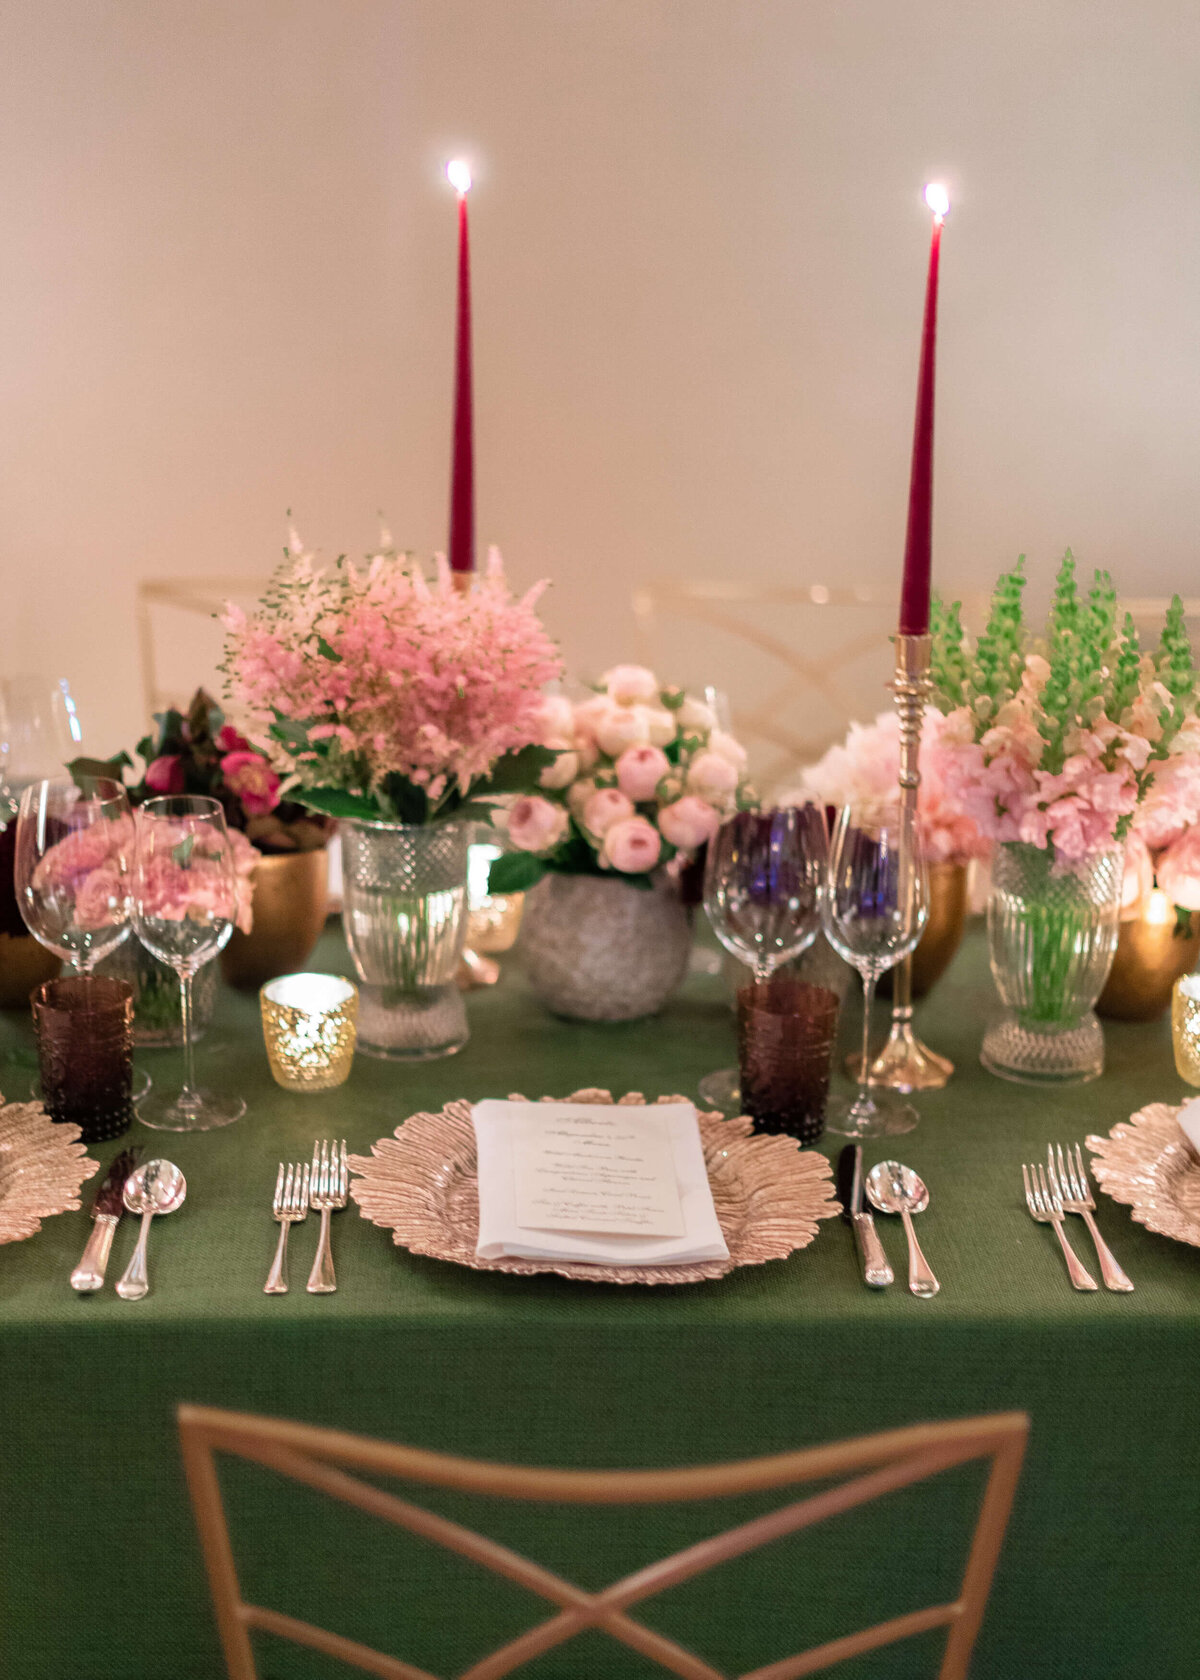 chloe-winstanley-events-gsp-candlelit-tablescape-wildabout-flower